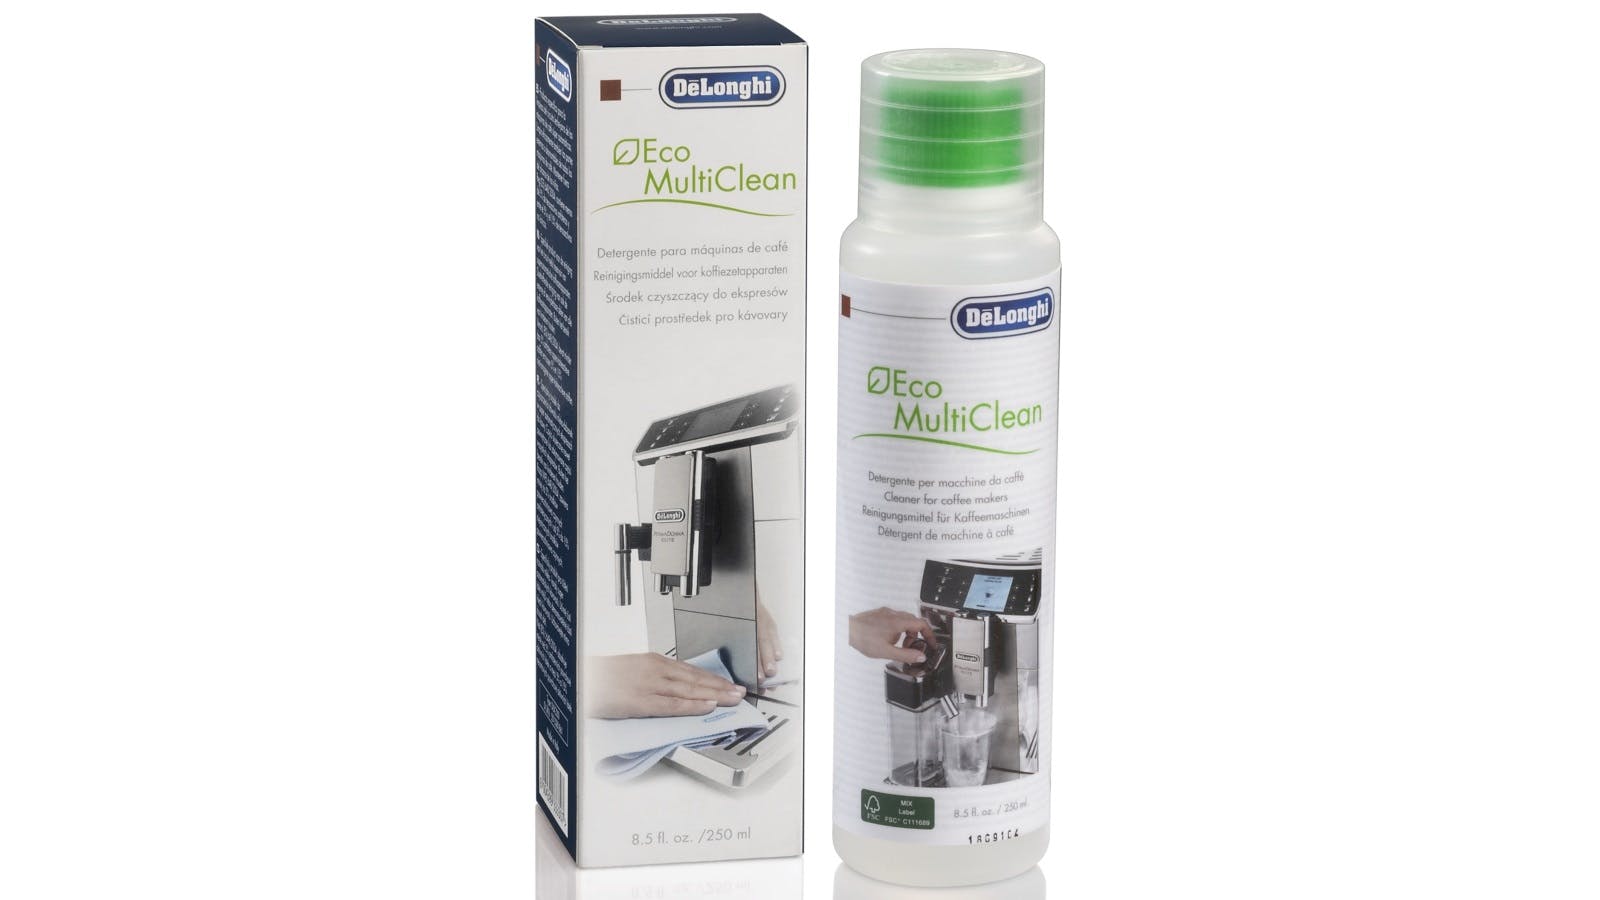 https://jmau.imgix.net/media/catalog/product/d/l/dlsc550-de-longhi-eco-multiclean-coffee-machine-cleaning-solution.jpg?auto=compress&auto=format&fill-color=FFFFFF&fit=fill&fill=solid&w=undefined&h=undefined